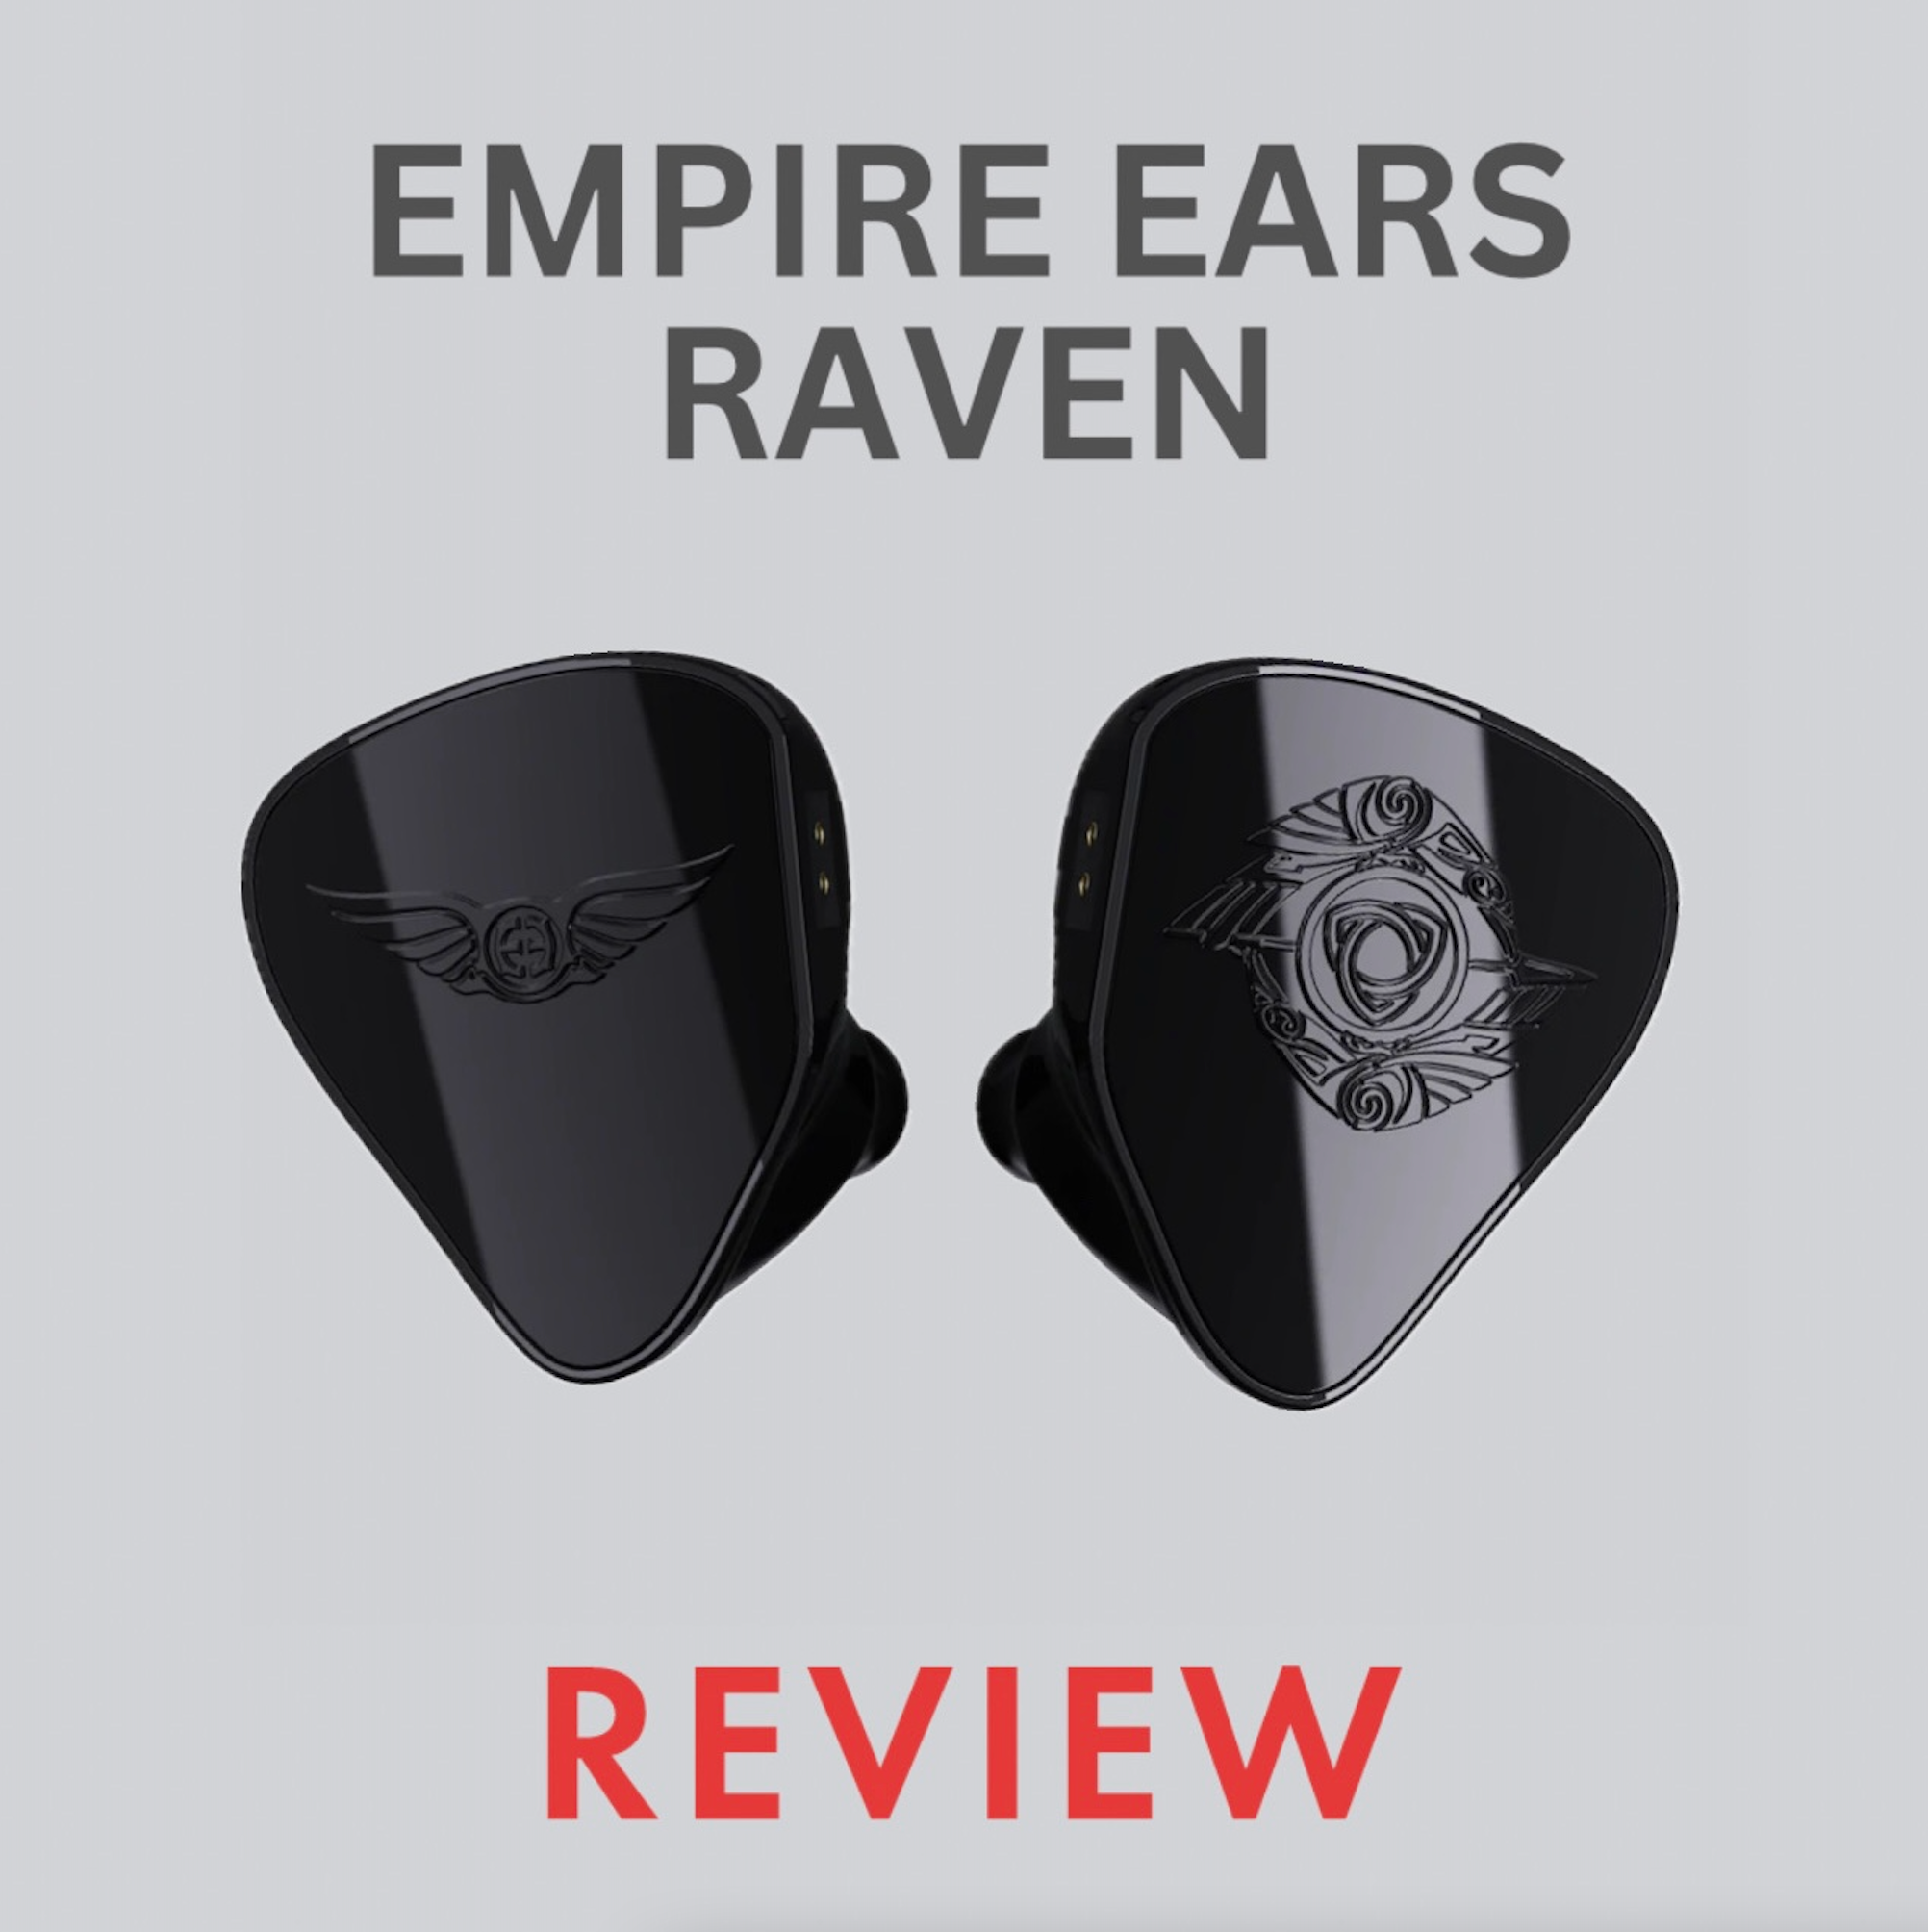 Empire Ears Raven Review